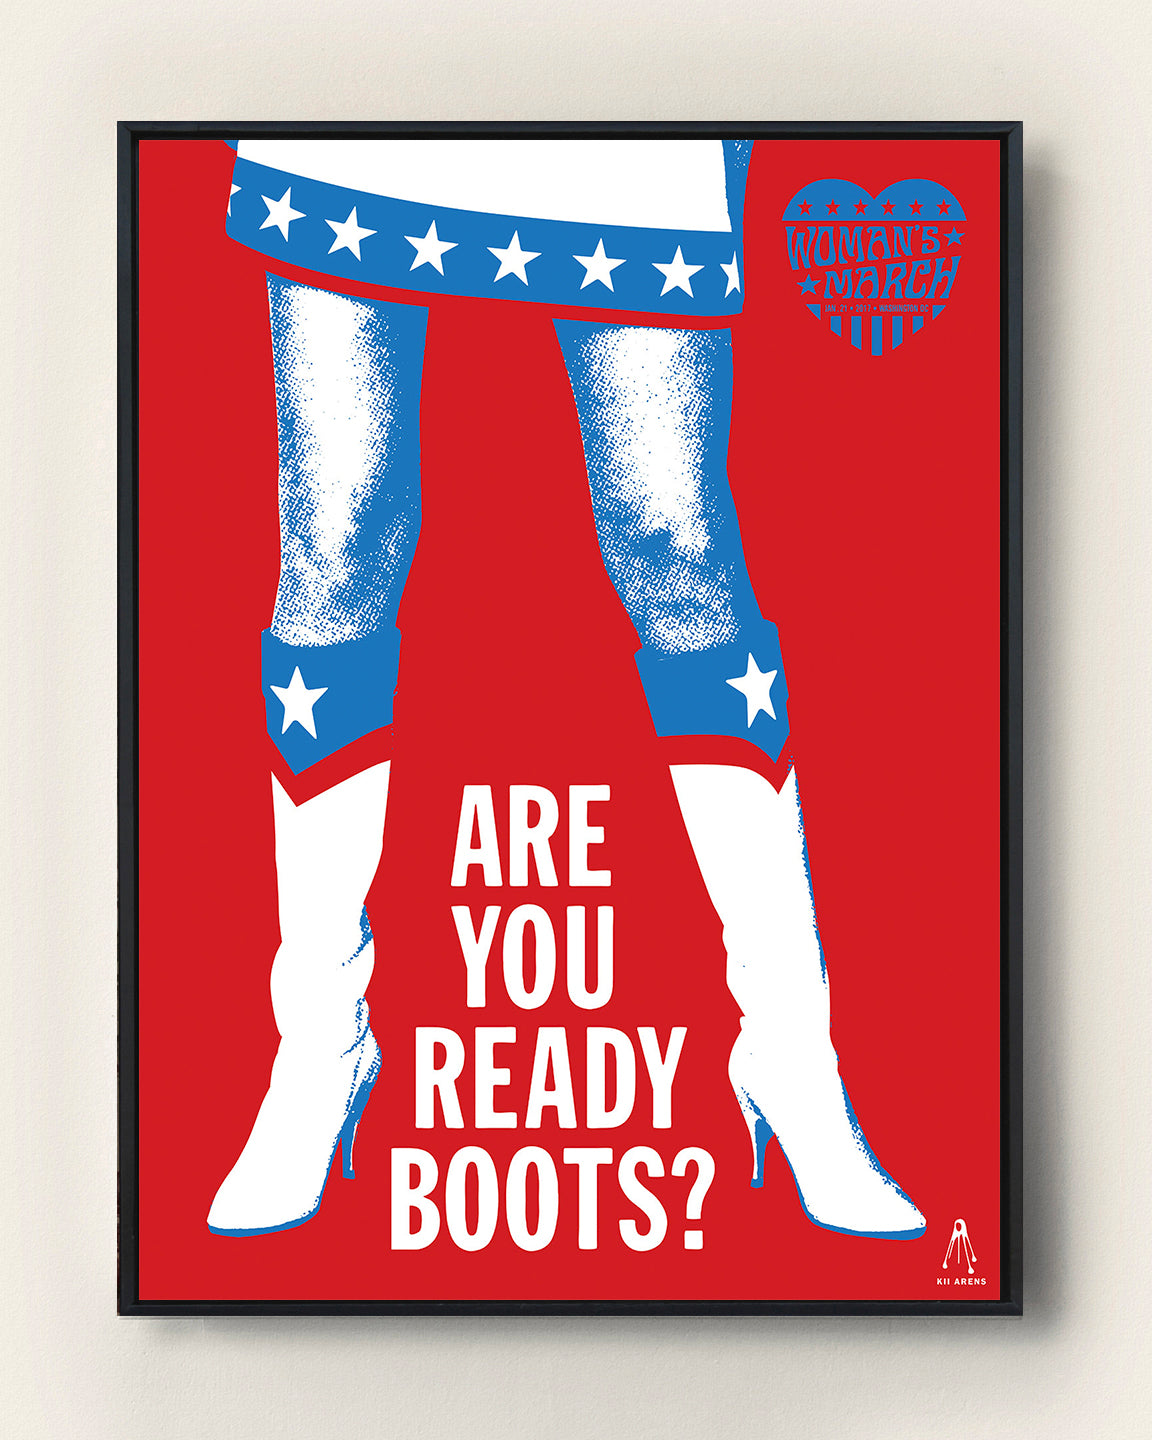 ARE YOU READY BOOTS?